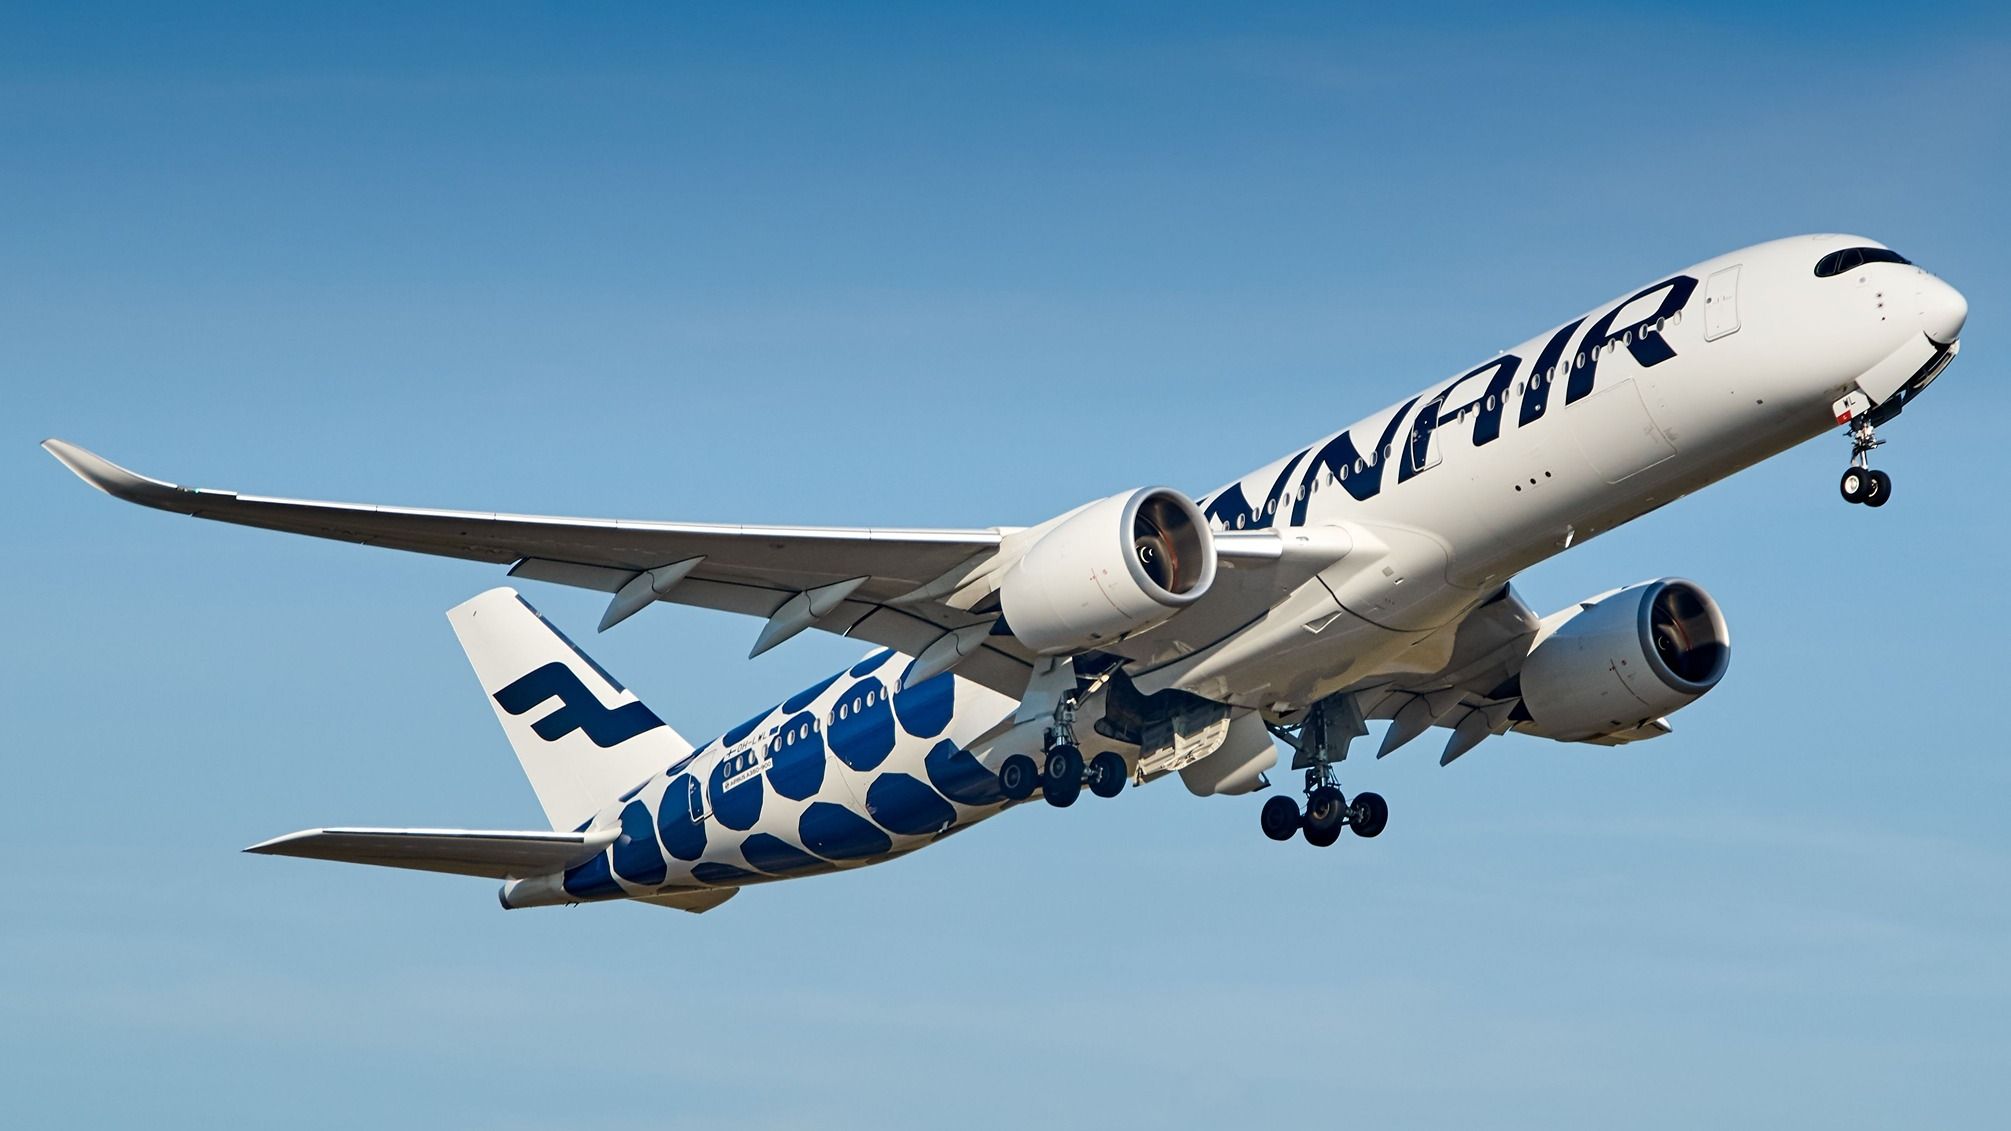 A Finnair Airbus A350 flying in the sky.